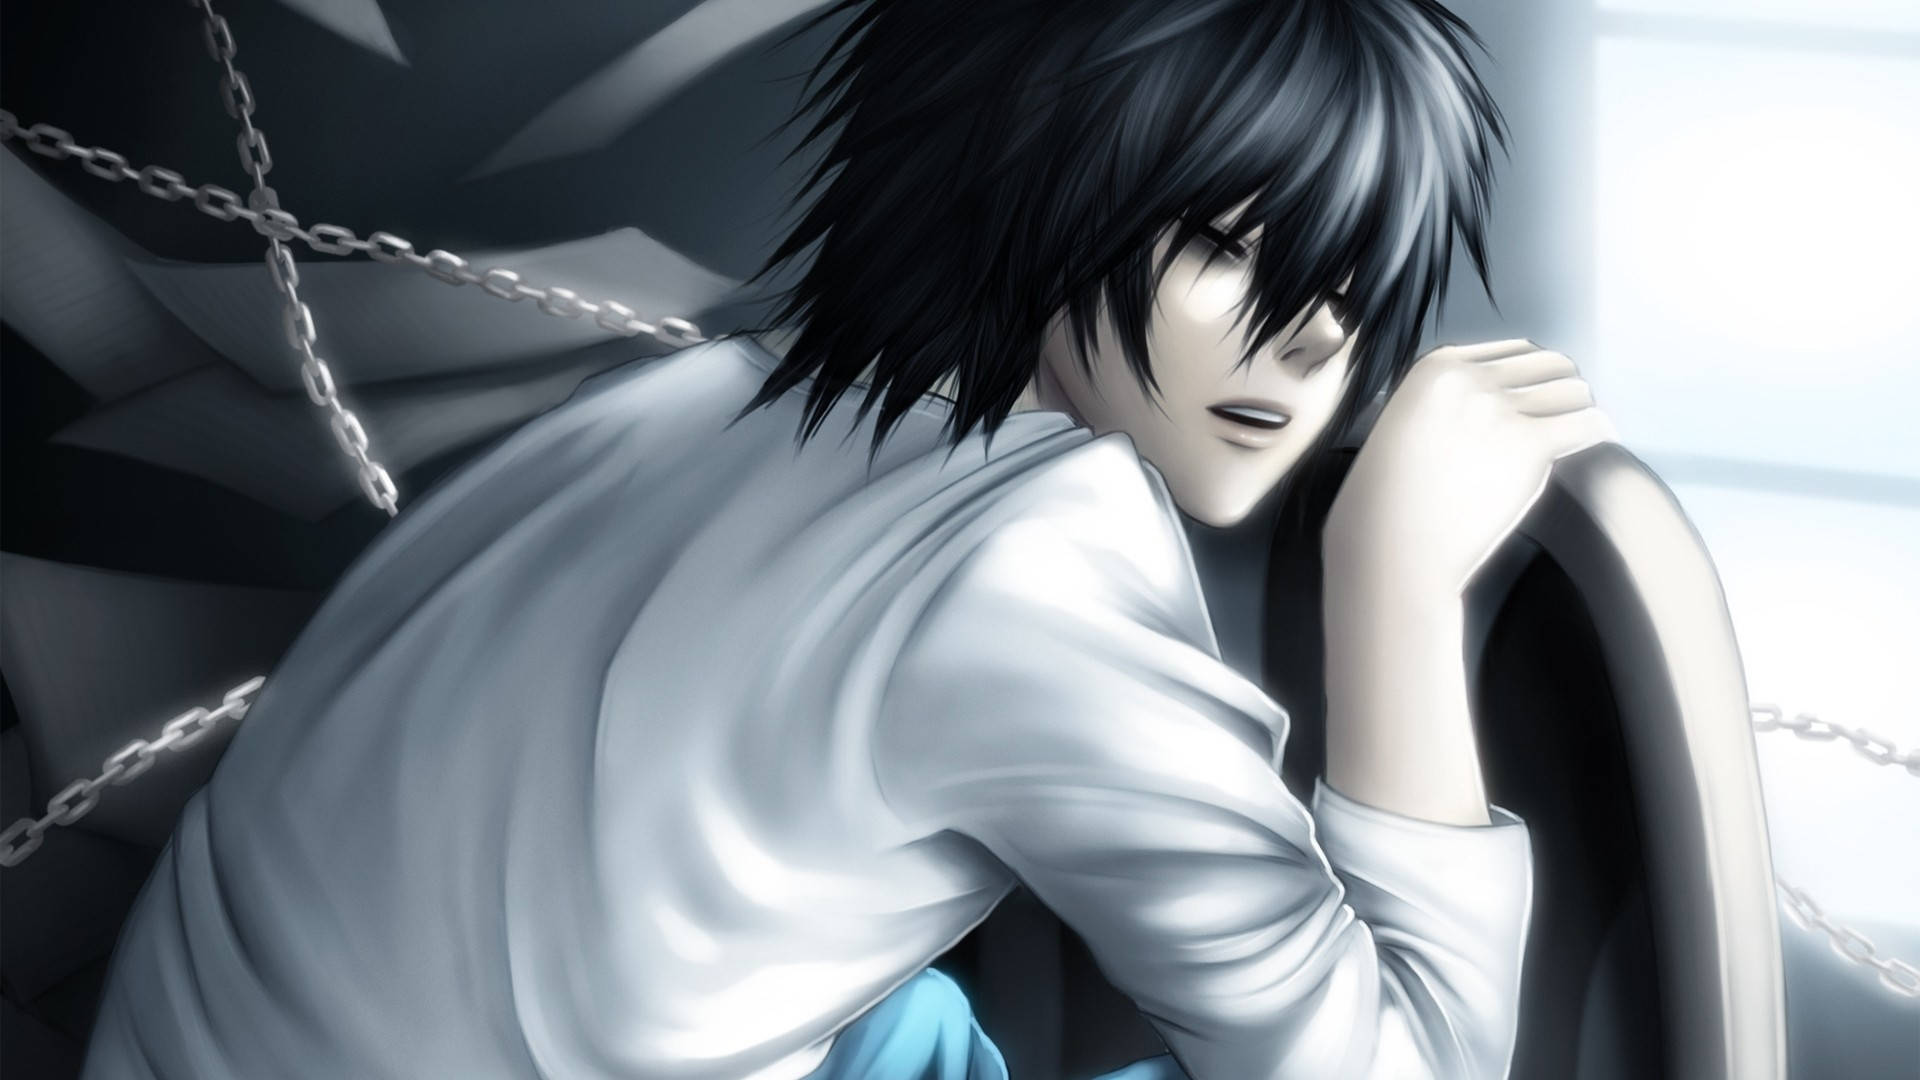 Sleepy L Lawliet From Death Note Background